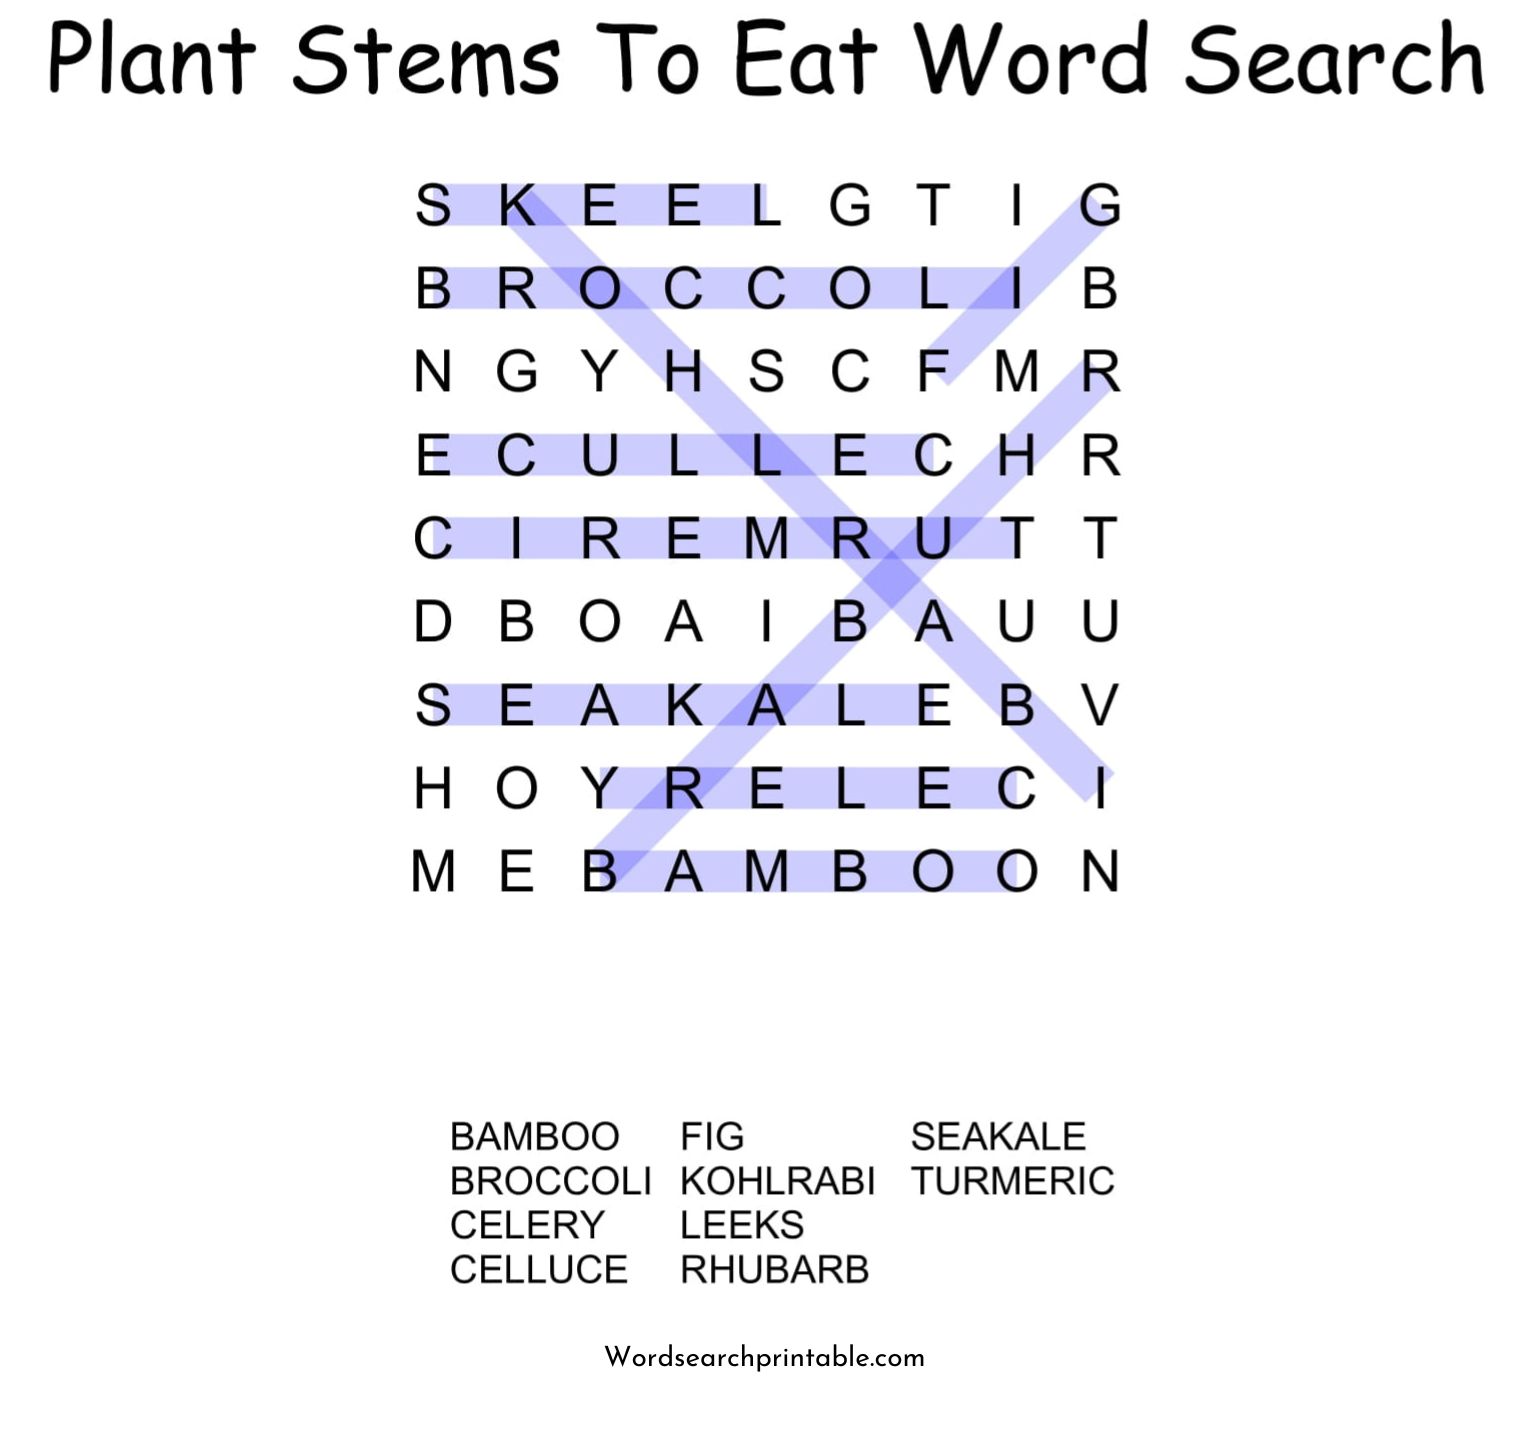 plant stems to eat word search puzzle solution